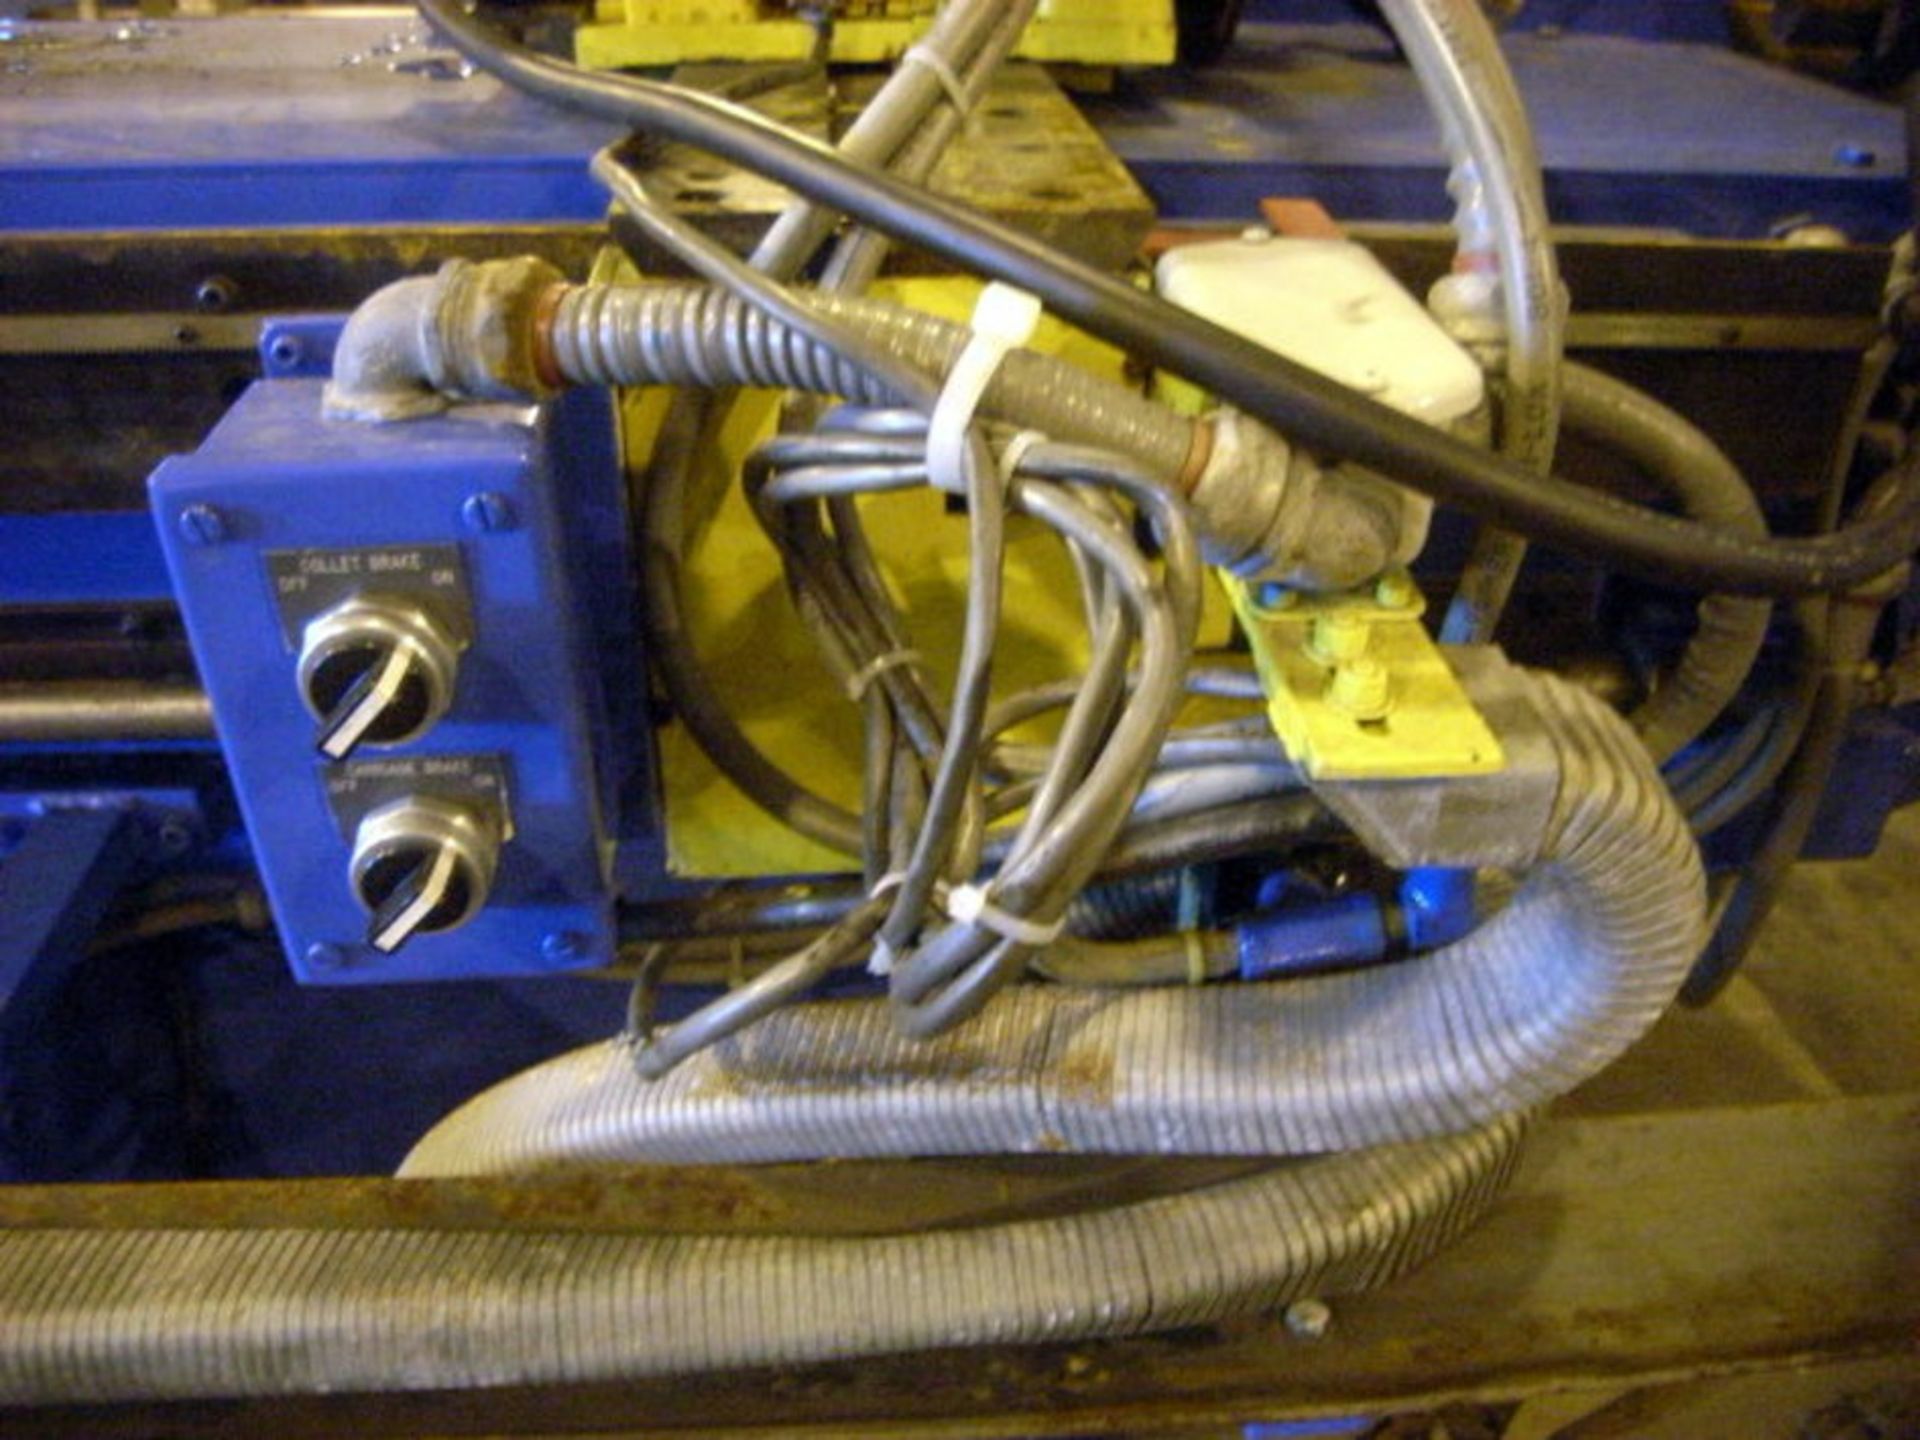 Pines Horizontal Hydraulic Tube Bender, 1 1/2" x 0.188", Mdl: #1 - Painesville, OH - 7116P - Image 15 of 35